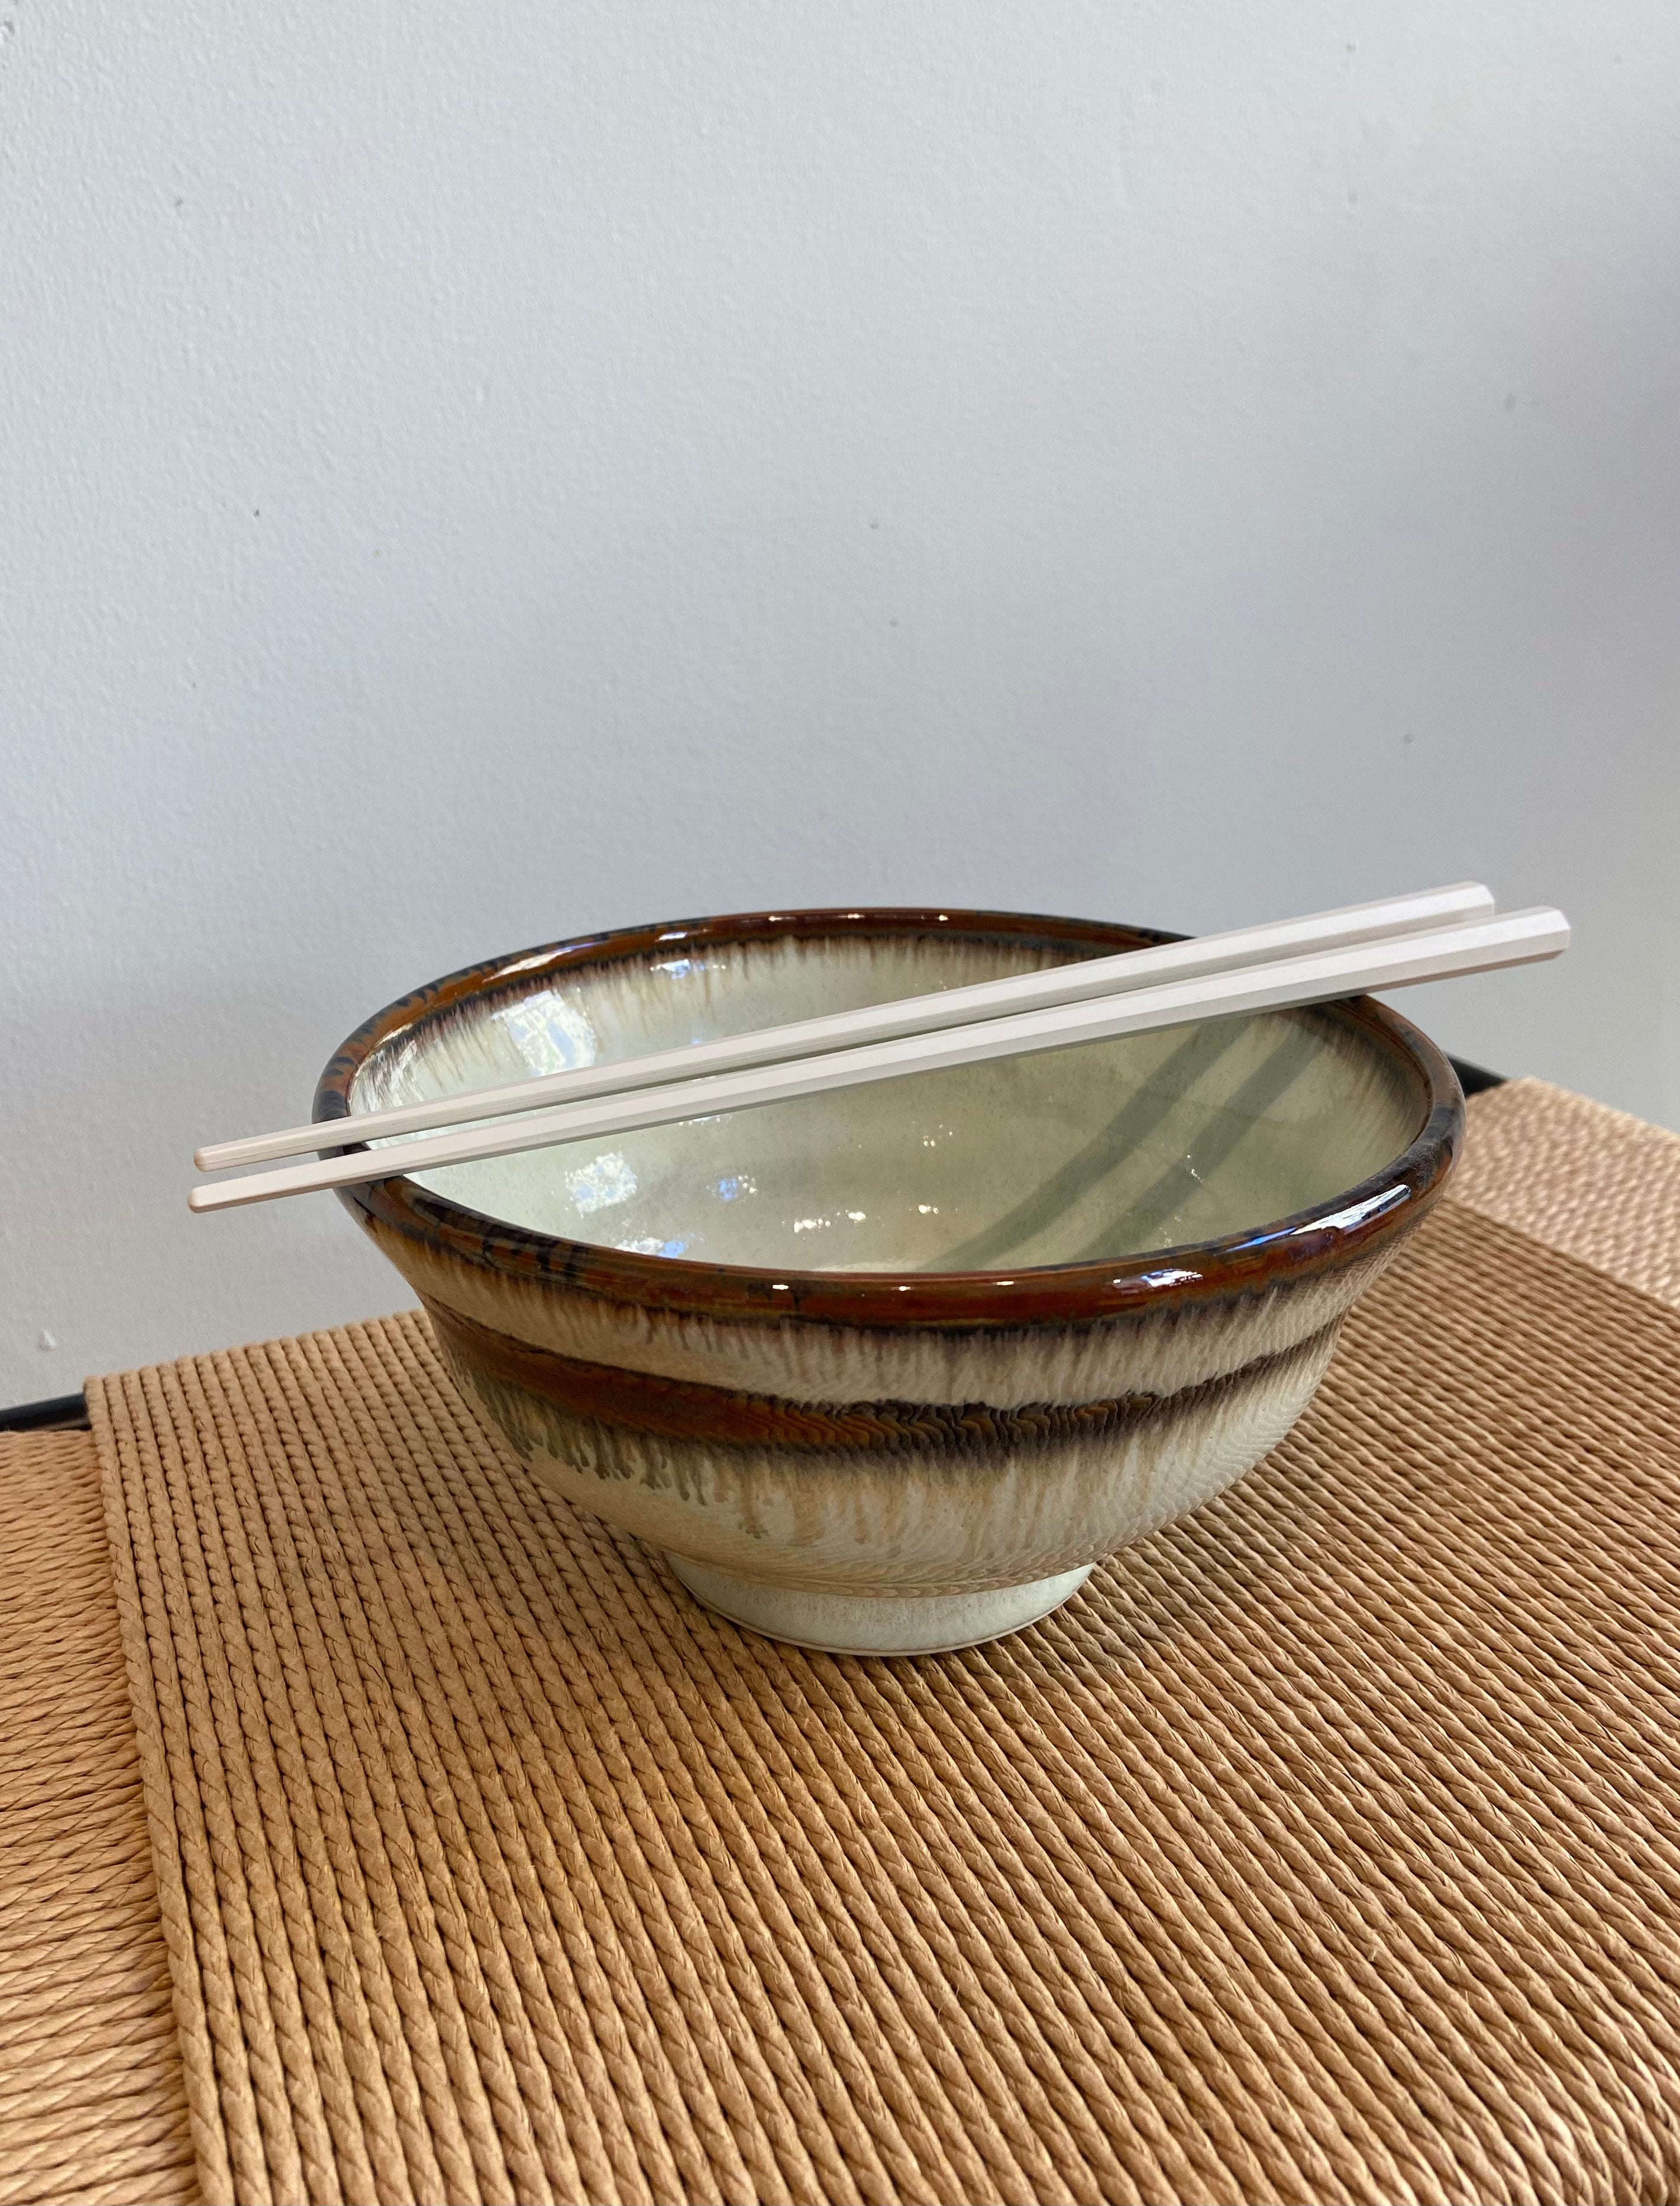 Small ramen bowl with brown stripes